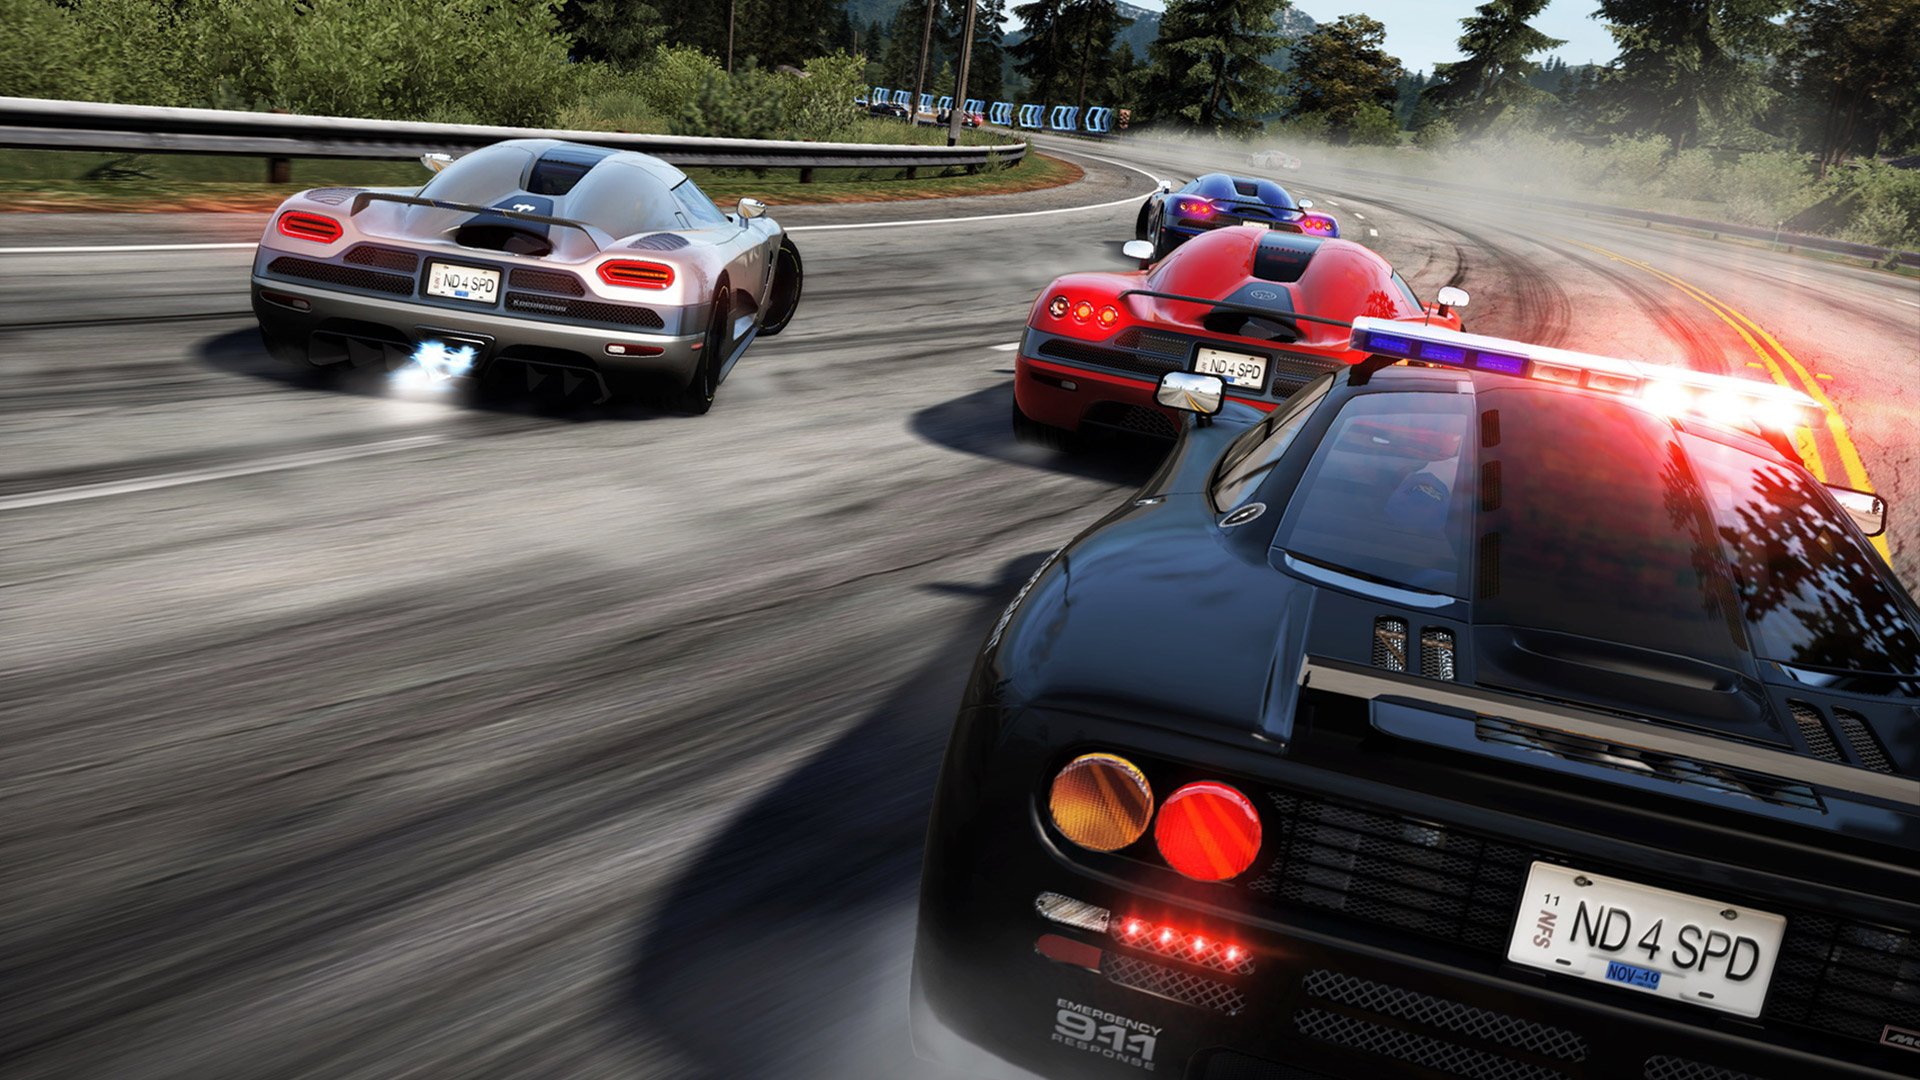 Video Game Need For Speed Hot Pursuit Wallpaper:1920x1080